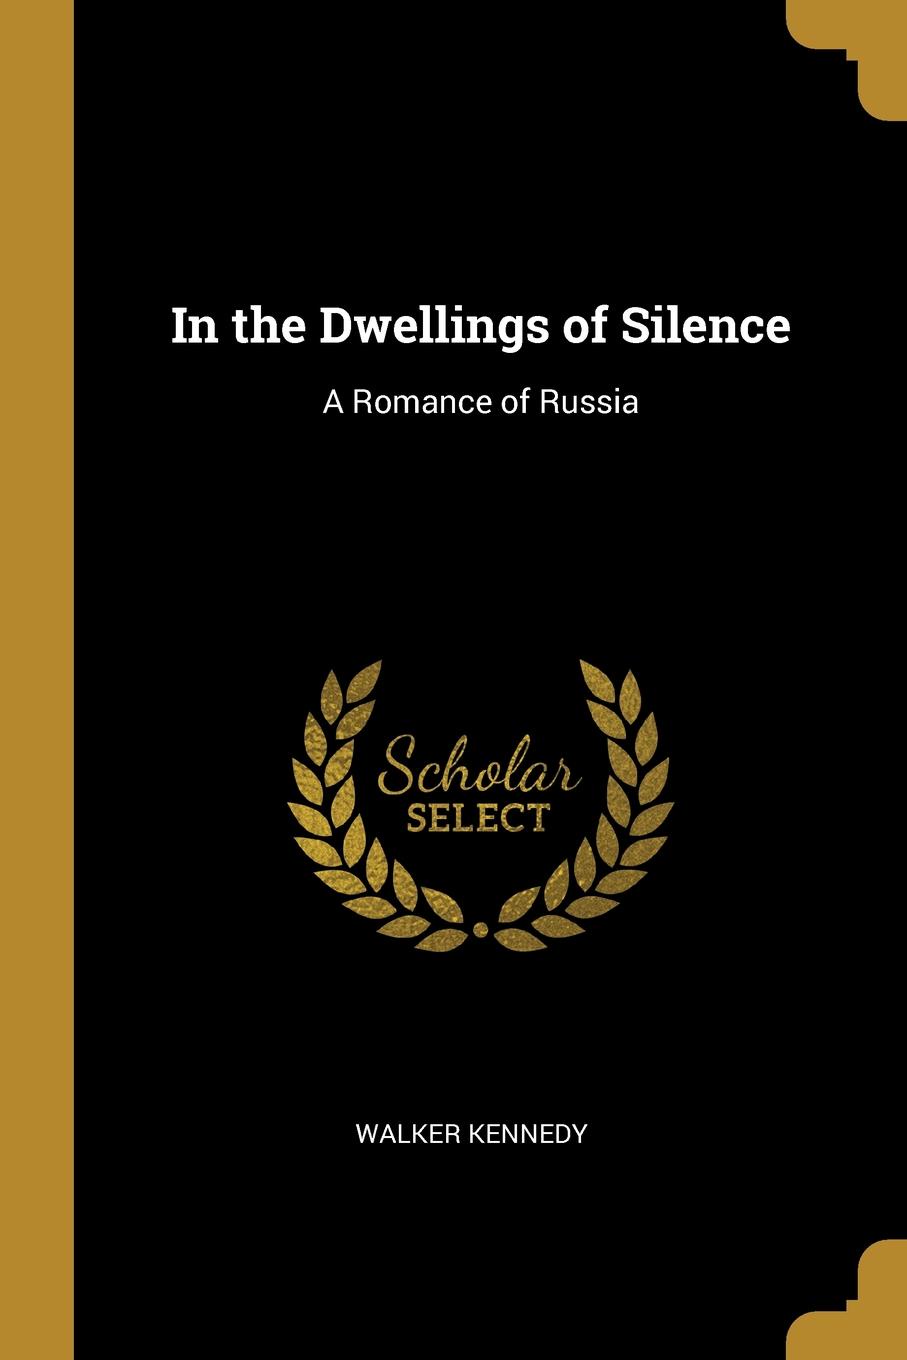 In the Dwellings of Silence. A Romance of Russia